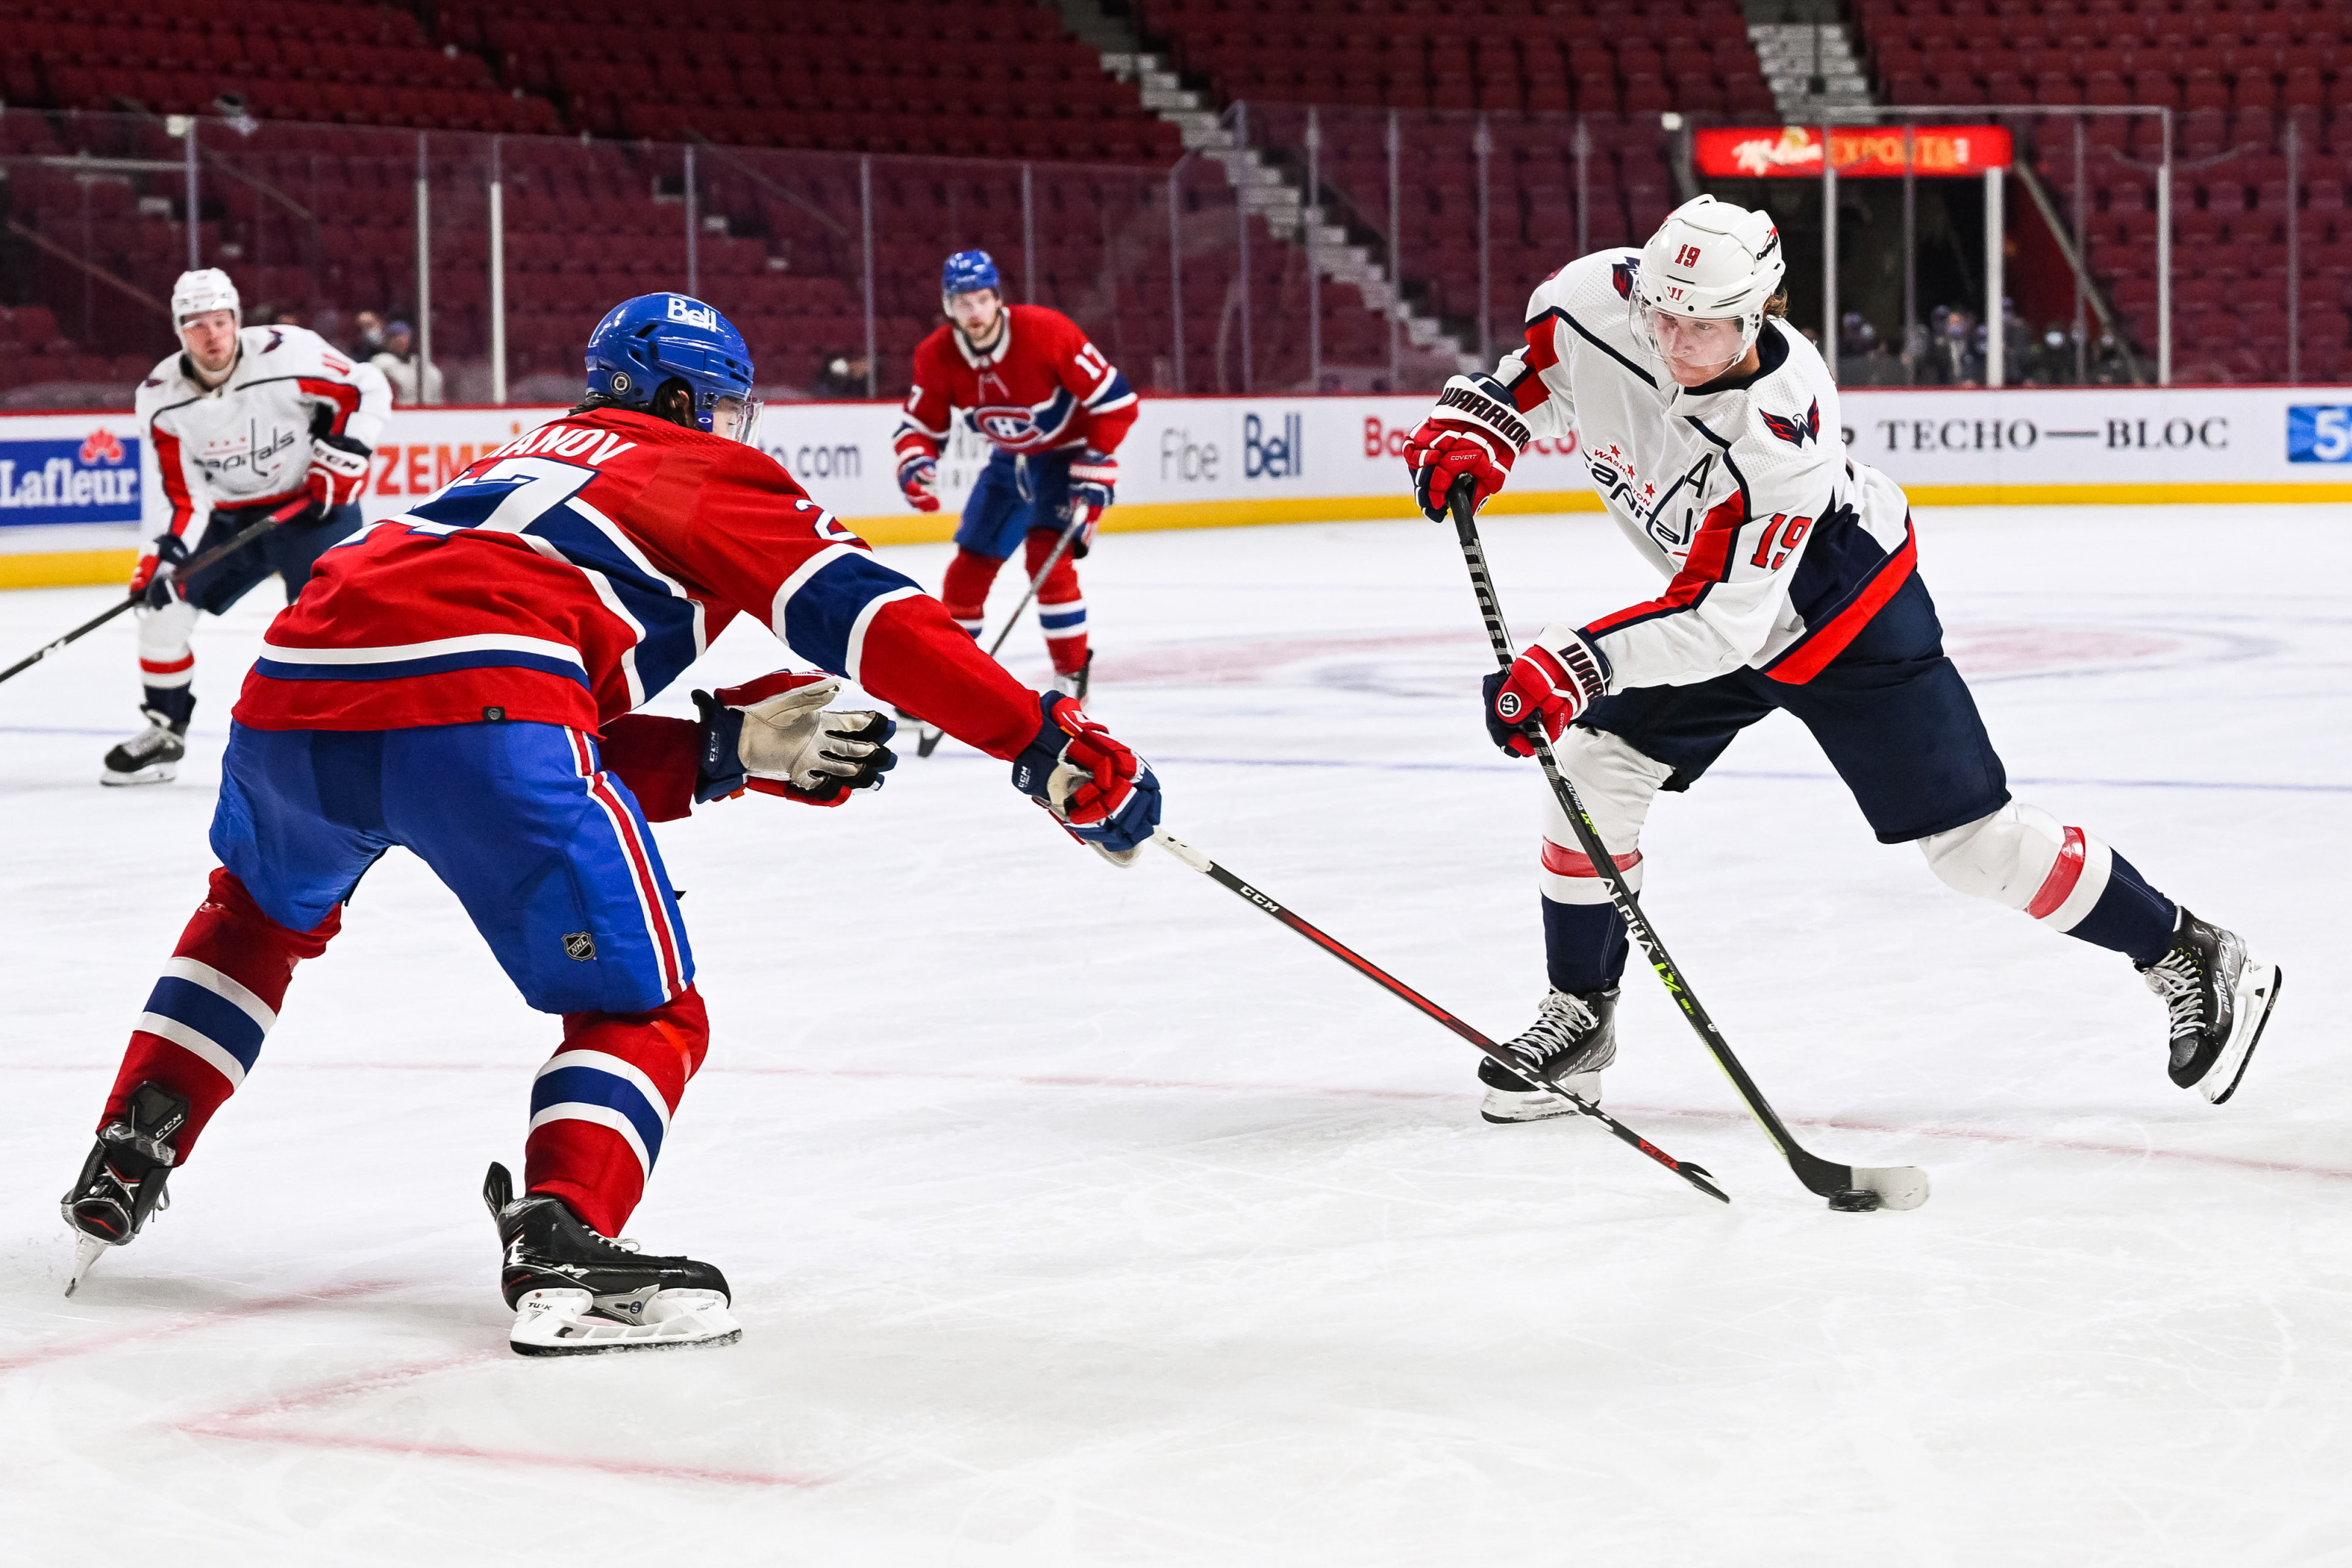 Snively Takes Ice In Non-Contact Jersey At Capitals Morning Skate